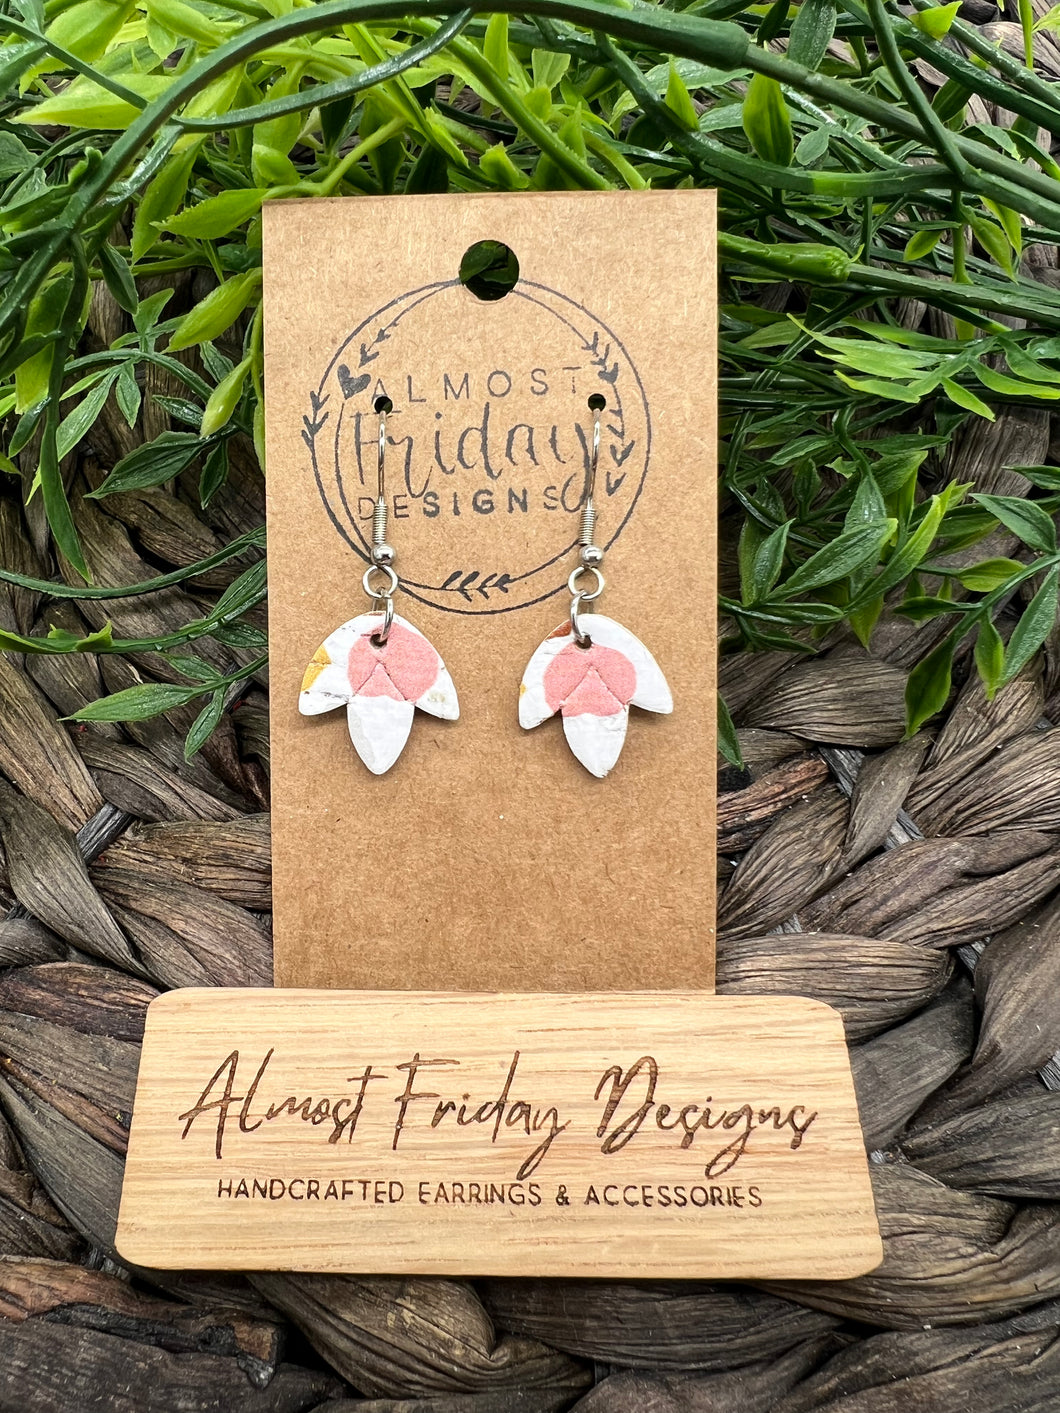 Genuine Leather Earrings - Falling Leaf - Small - White - Pink - Navy Red - Mustard - Gray - Dots - Polka Dots - Embossed - Statement Earrings - Leather